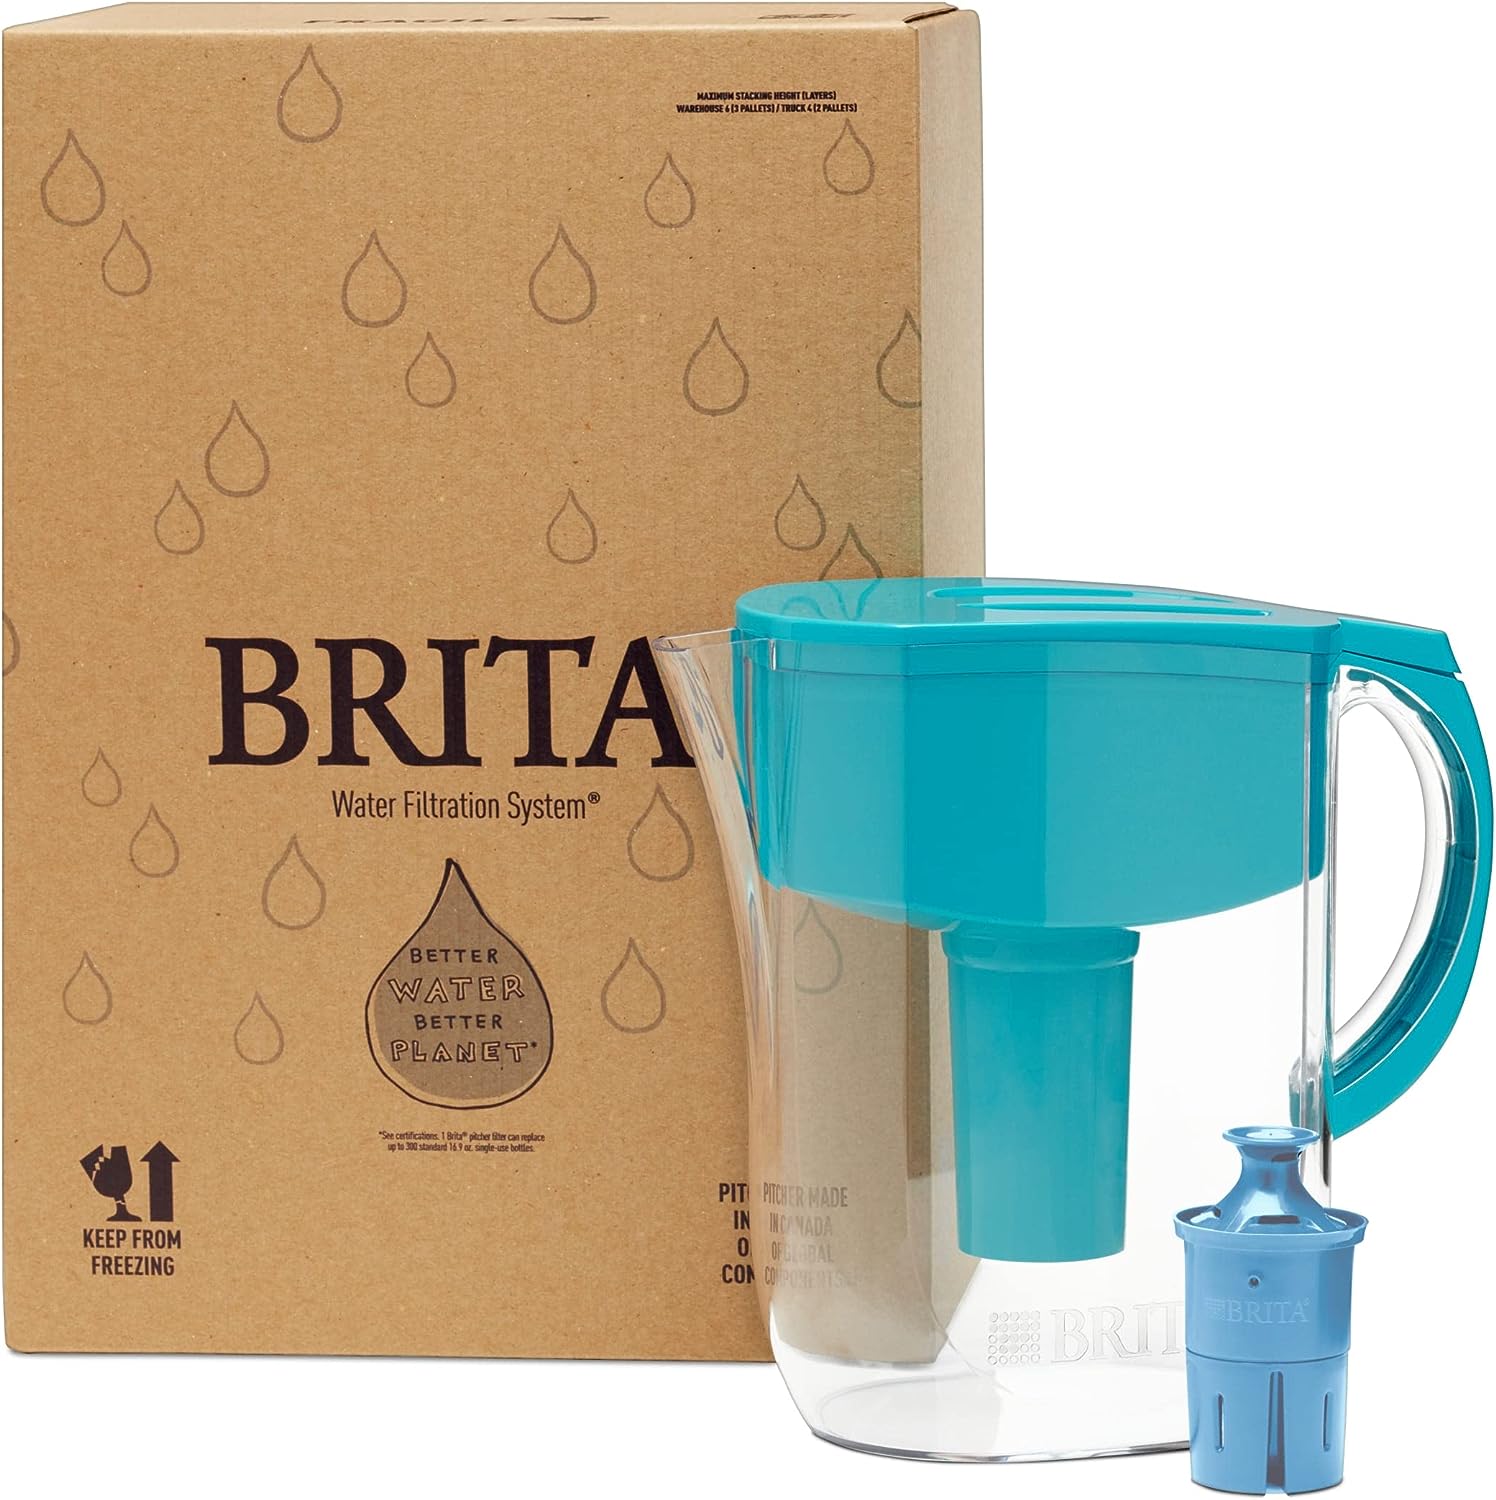 Brita Large Water Filter Pitcher Review